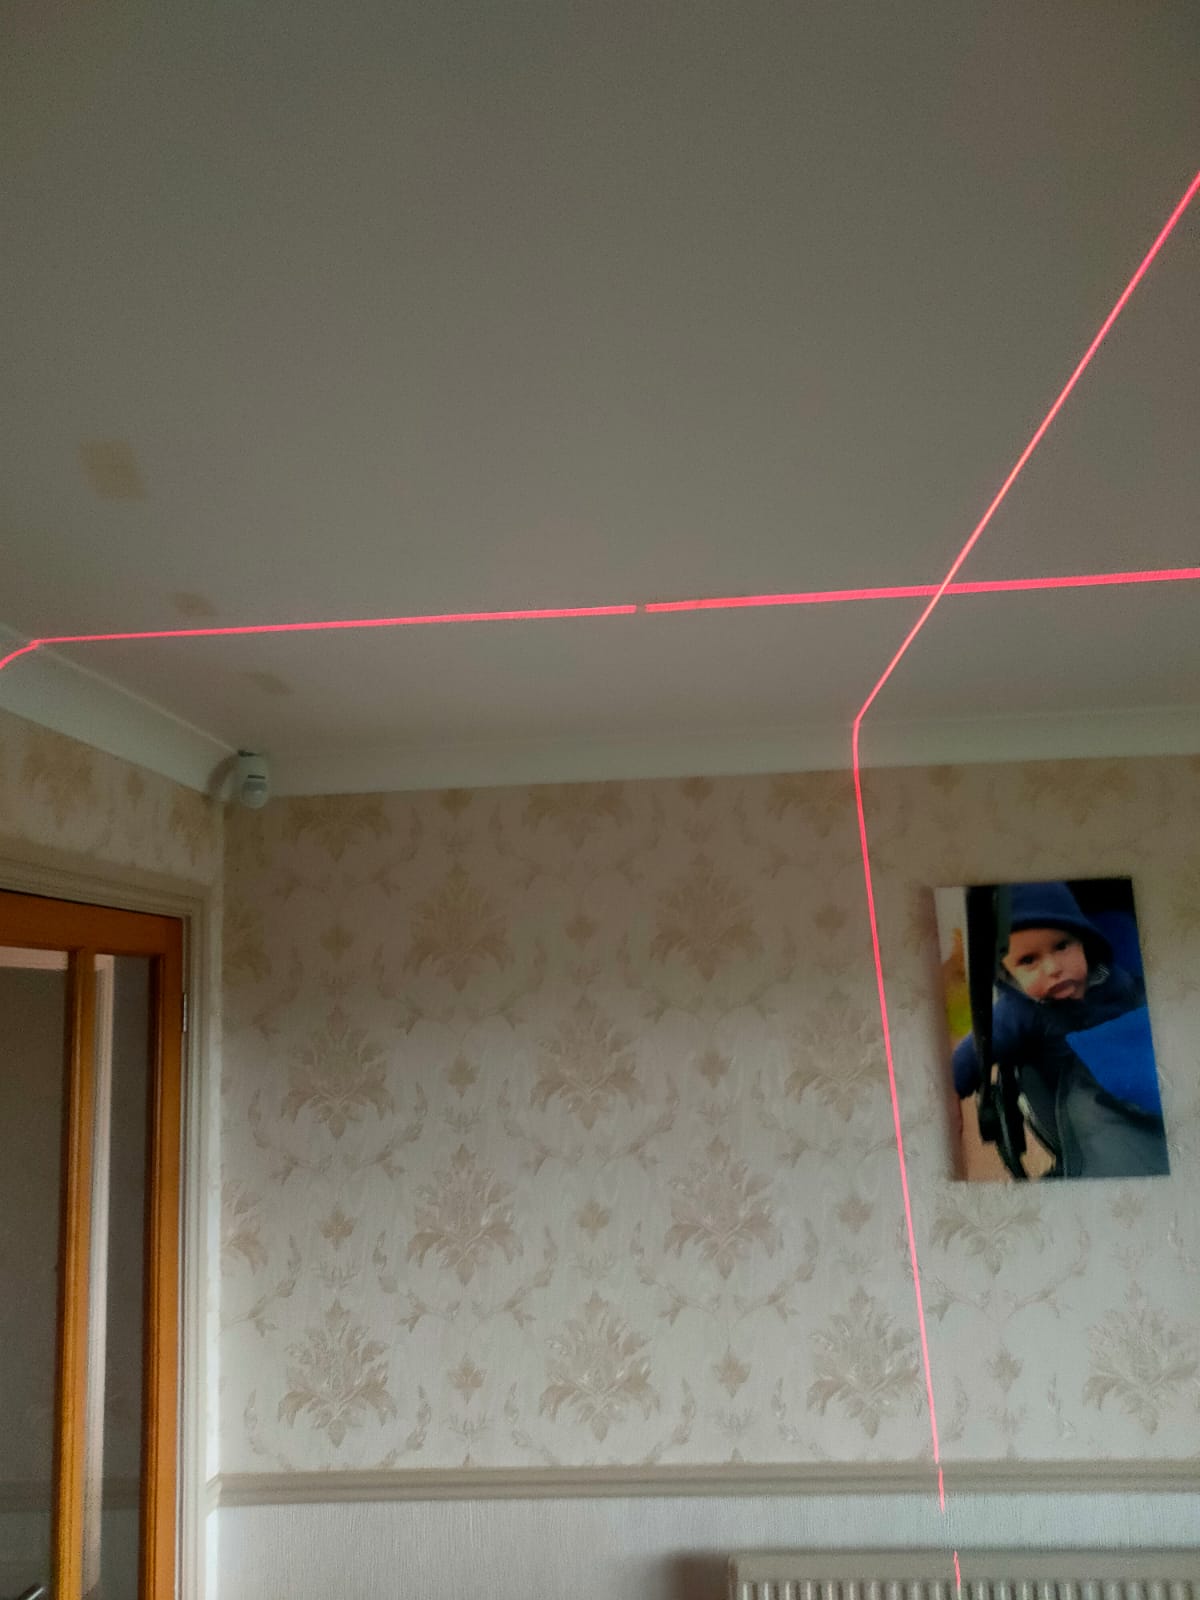 Using a laser level we can mark along the line using masking tape to show where each light will go, this is the laser level running across the celling in a perfect X